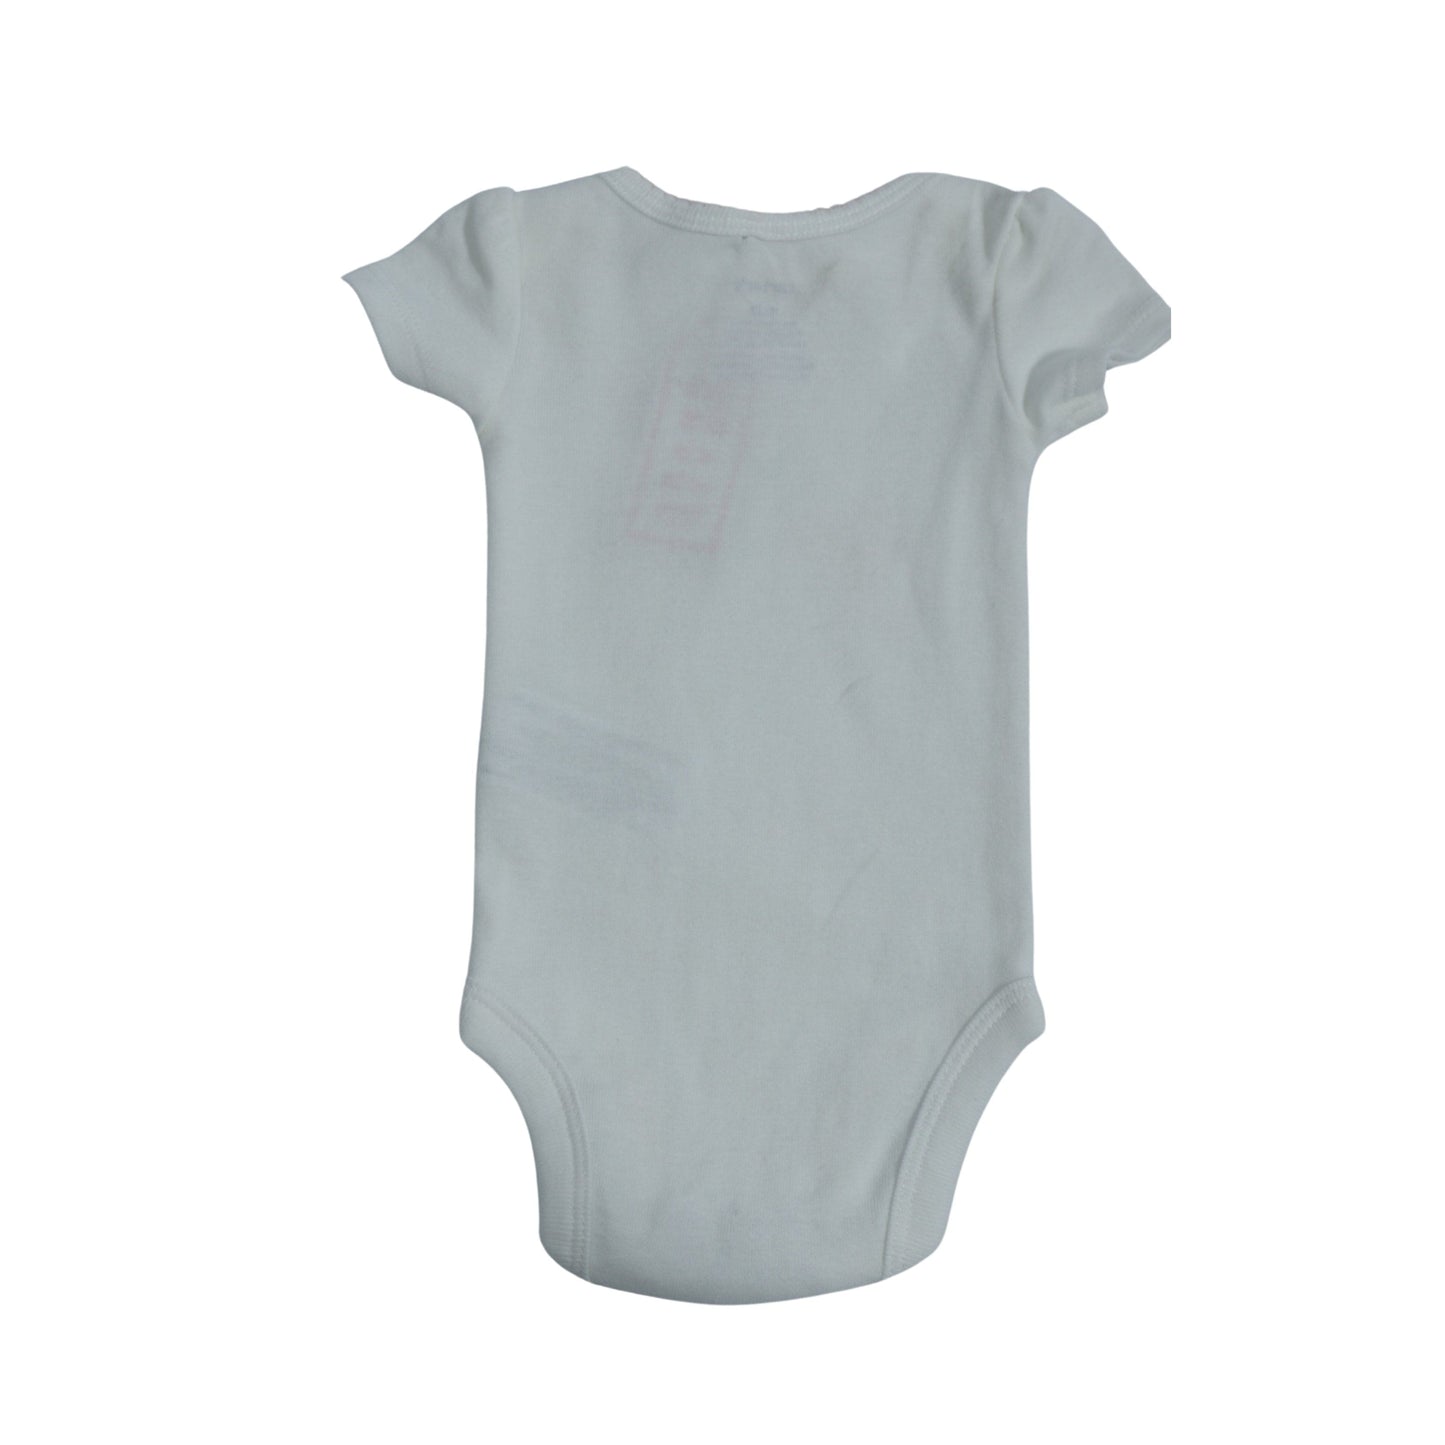 CARTER'S Baby Girl New Born / White CARTER'S - Baby - Front Simple Nature Print Bodysuit